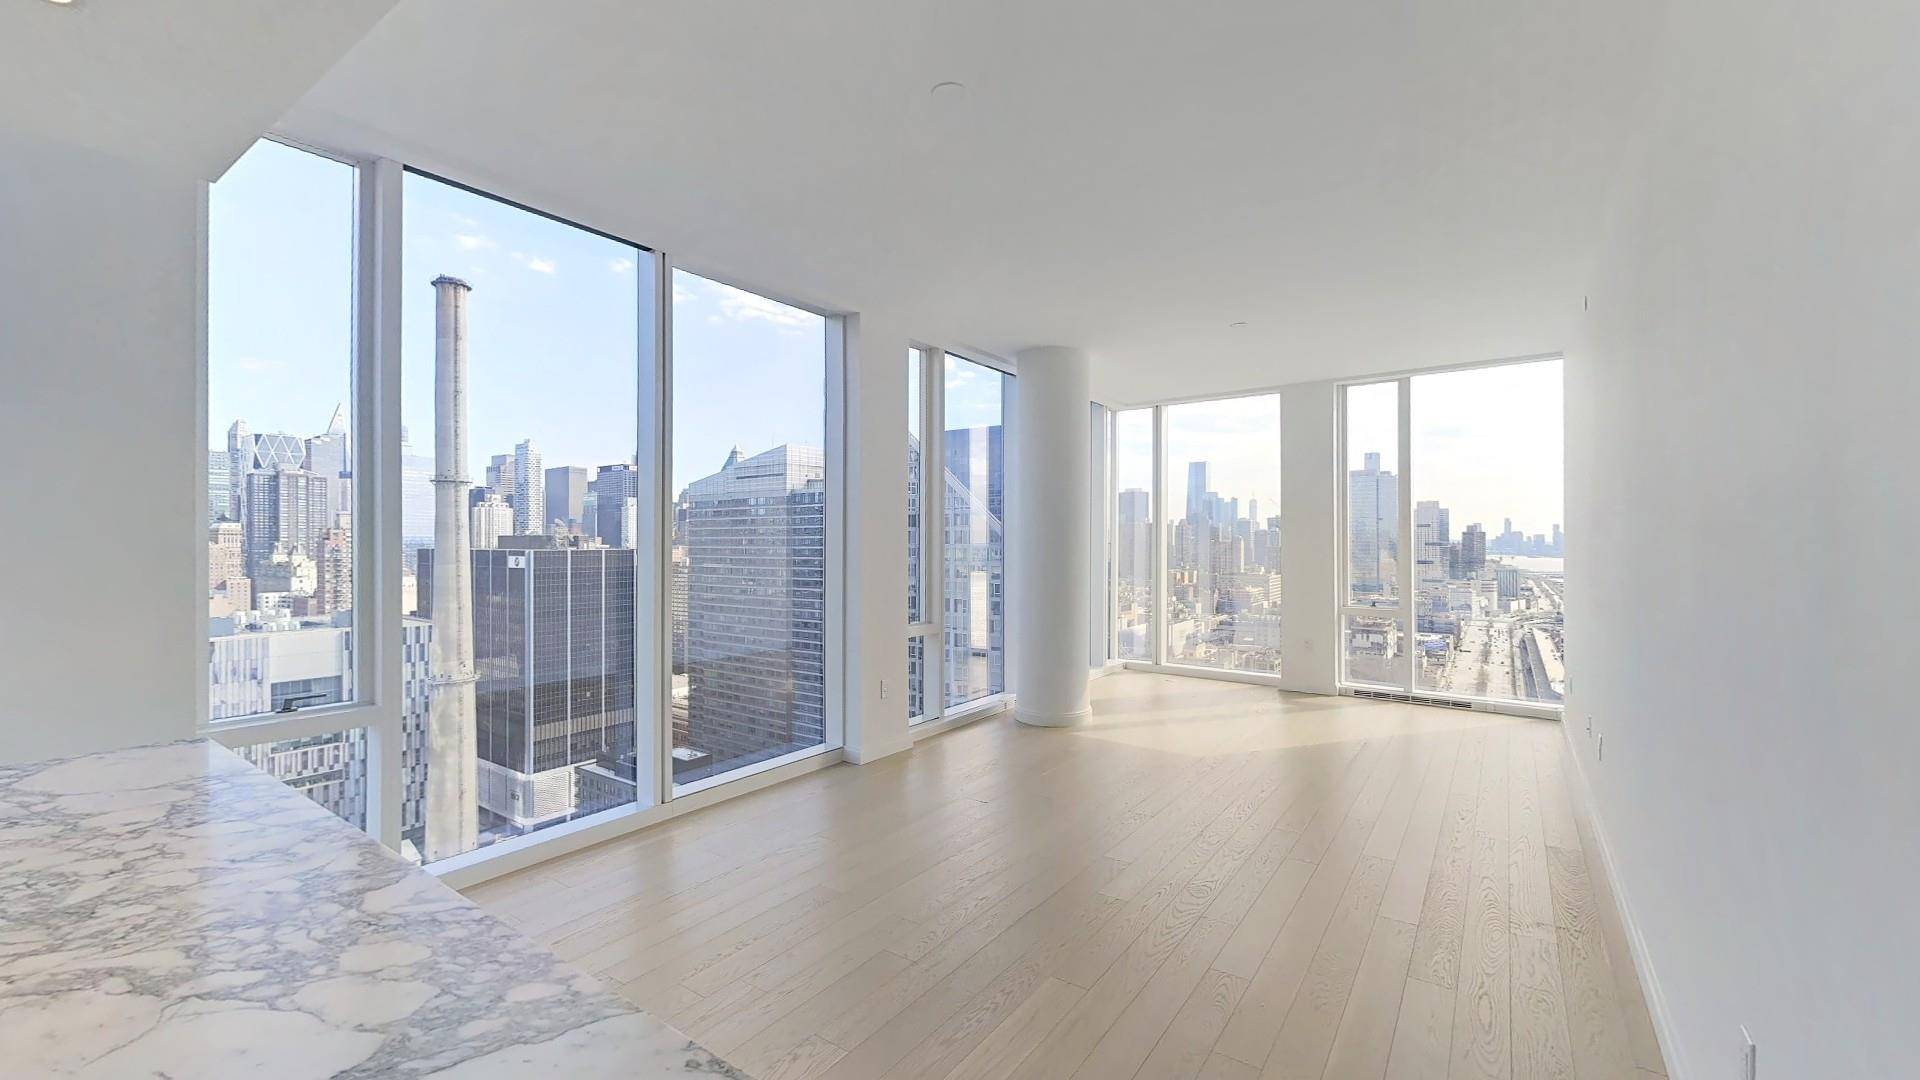 This south east facing two bedroom, two and a half bath residence offers views down the Hudson River and the Manhattan skyline.